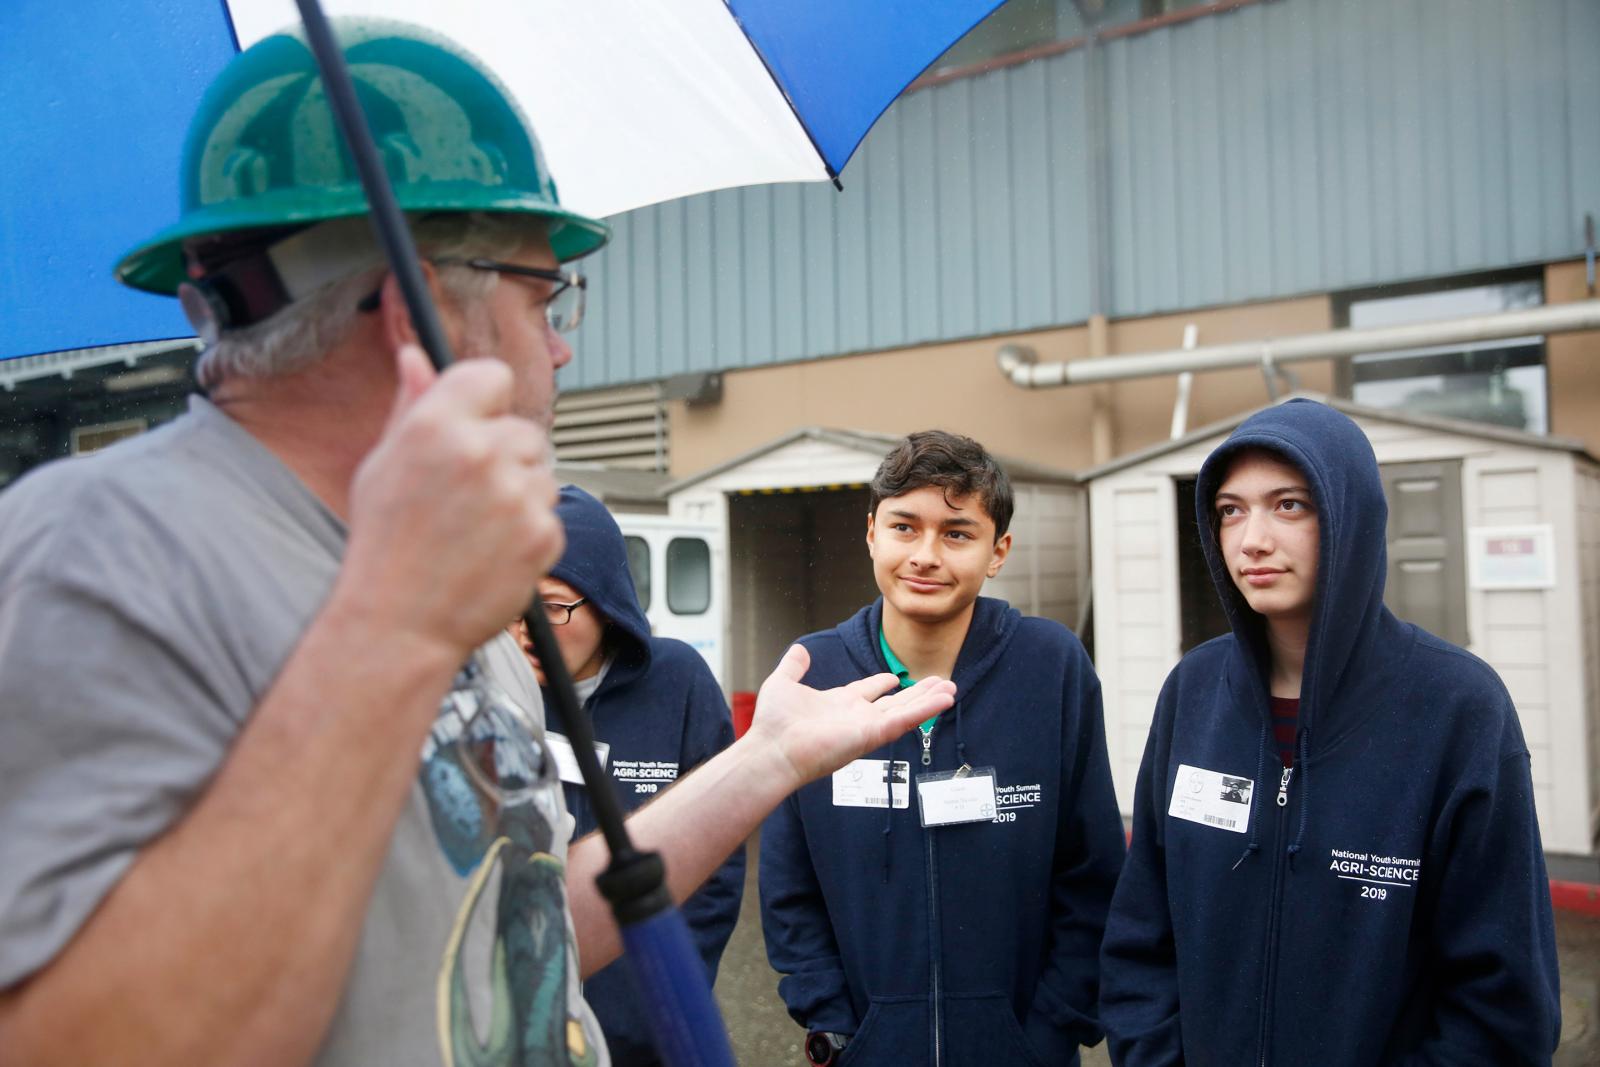 teens listening to adult wearing a hard hat